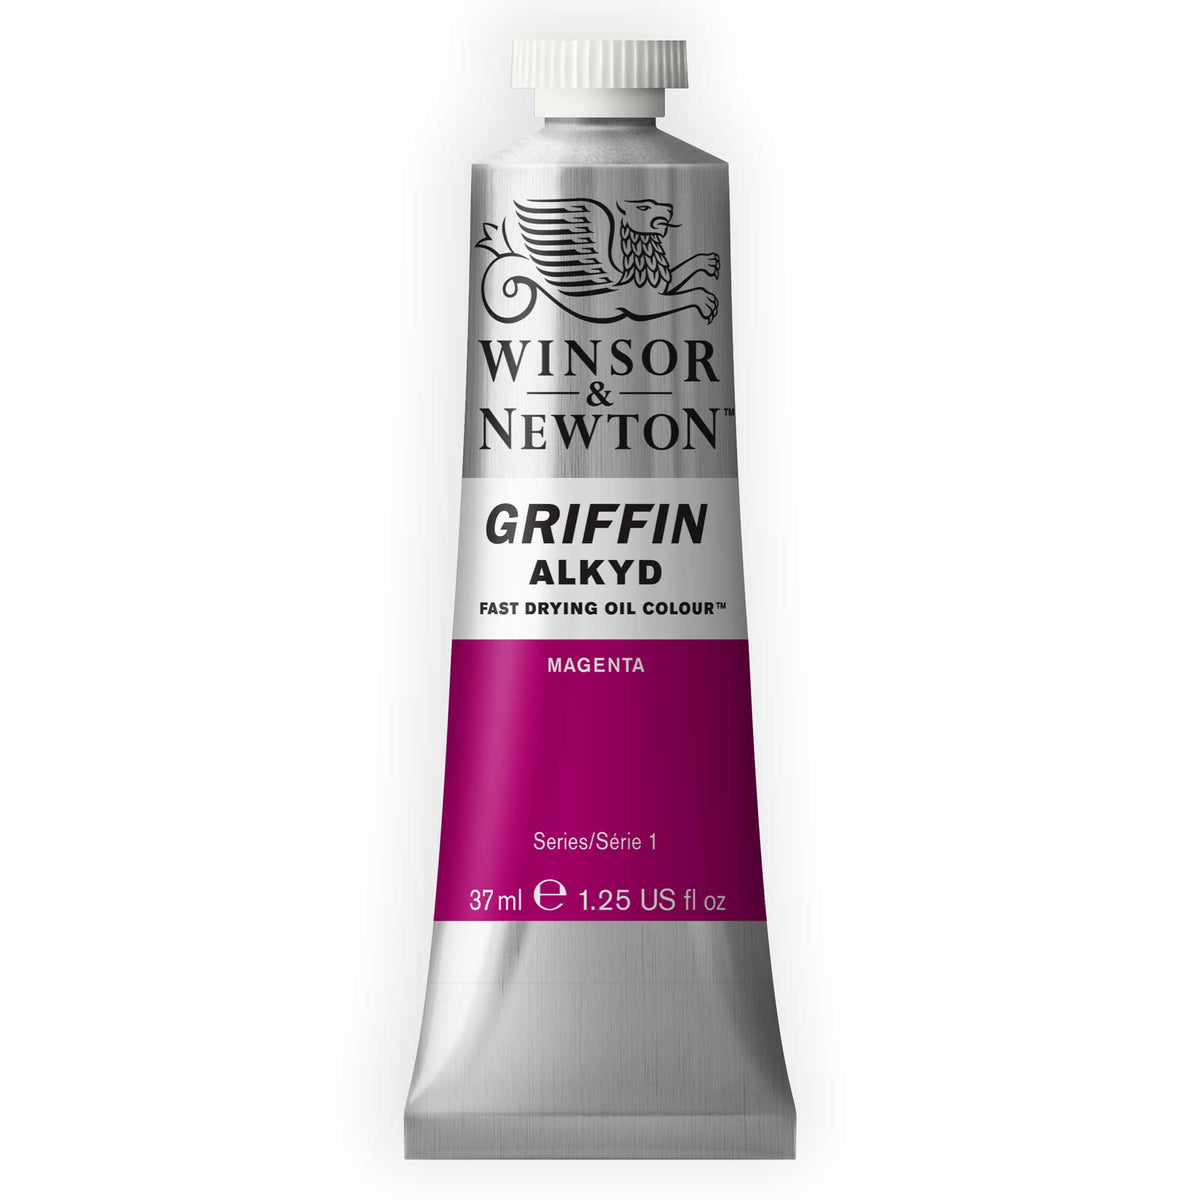 Winsor &amp; Newton Griffin Alkyd Fast Drying Oil Colour 37ml - Series 1